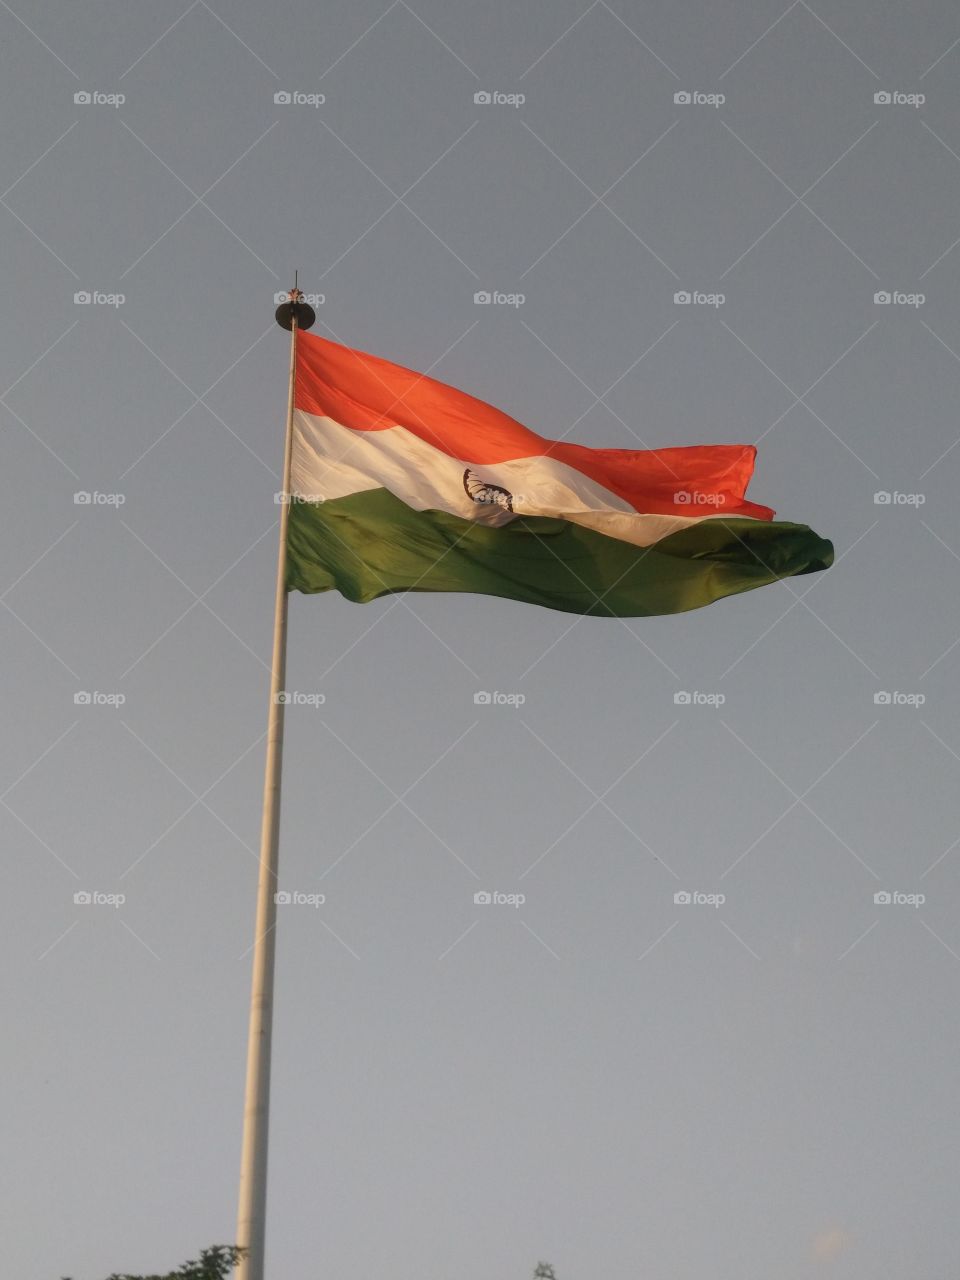 Low angle view of indian flag